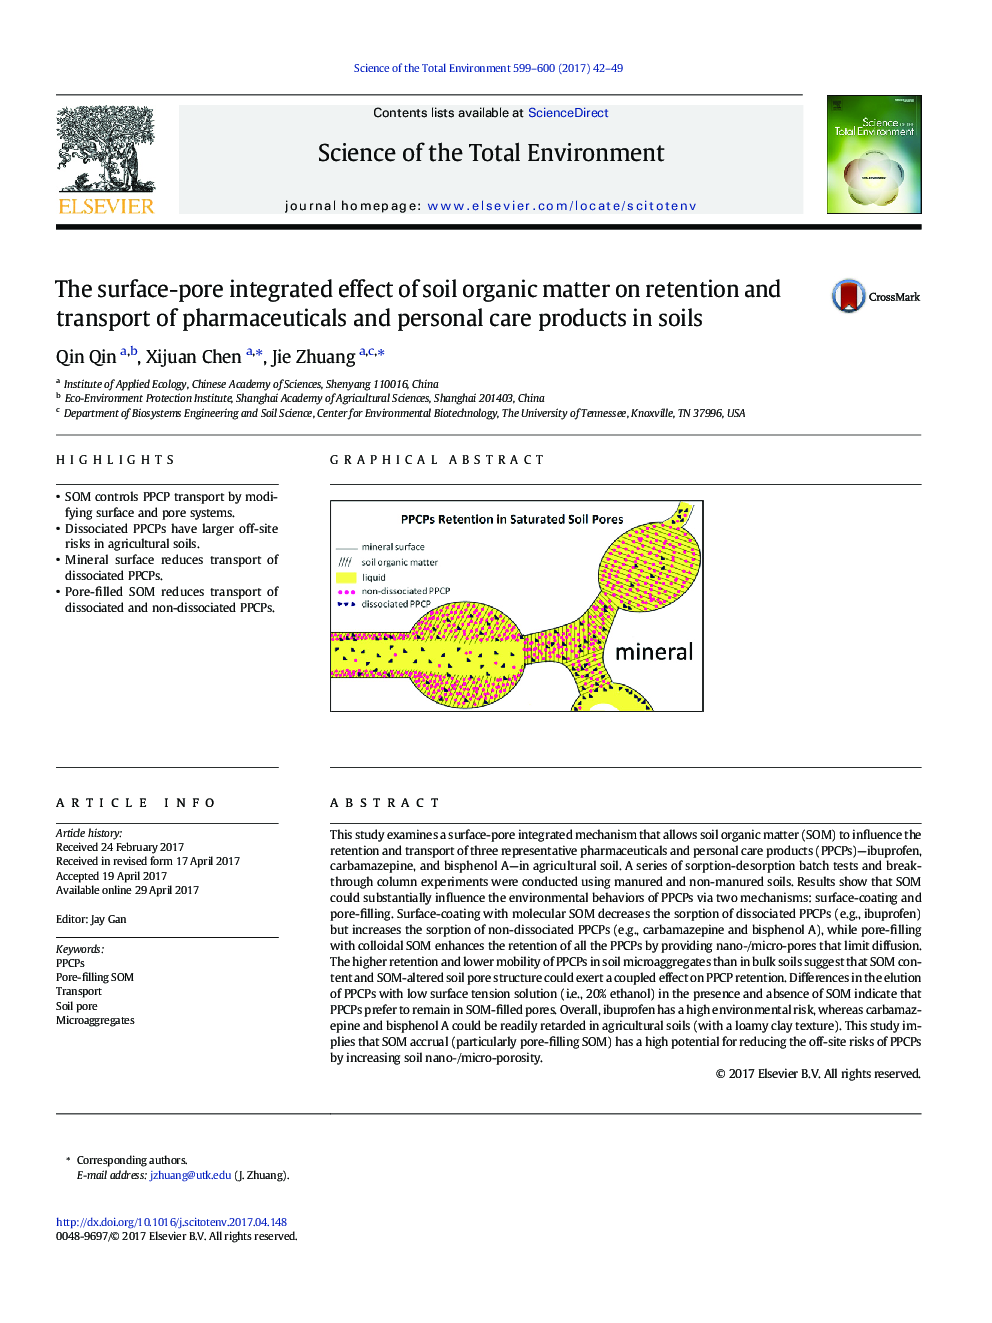 The surface-pore integrated effect of soil organic matter on retention and transport of pharmaceuticals and personal care products in soils